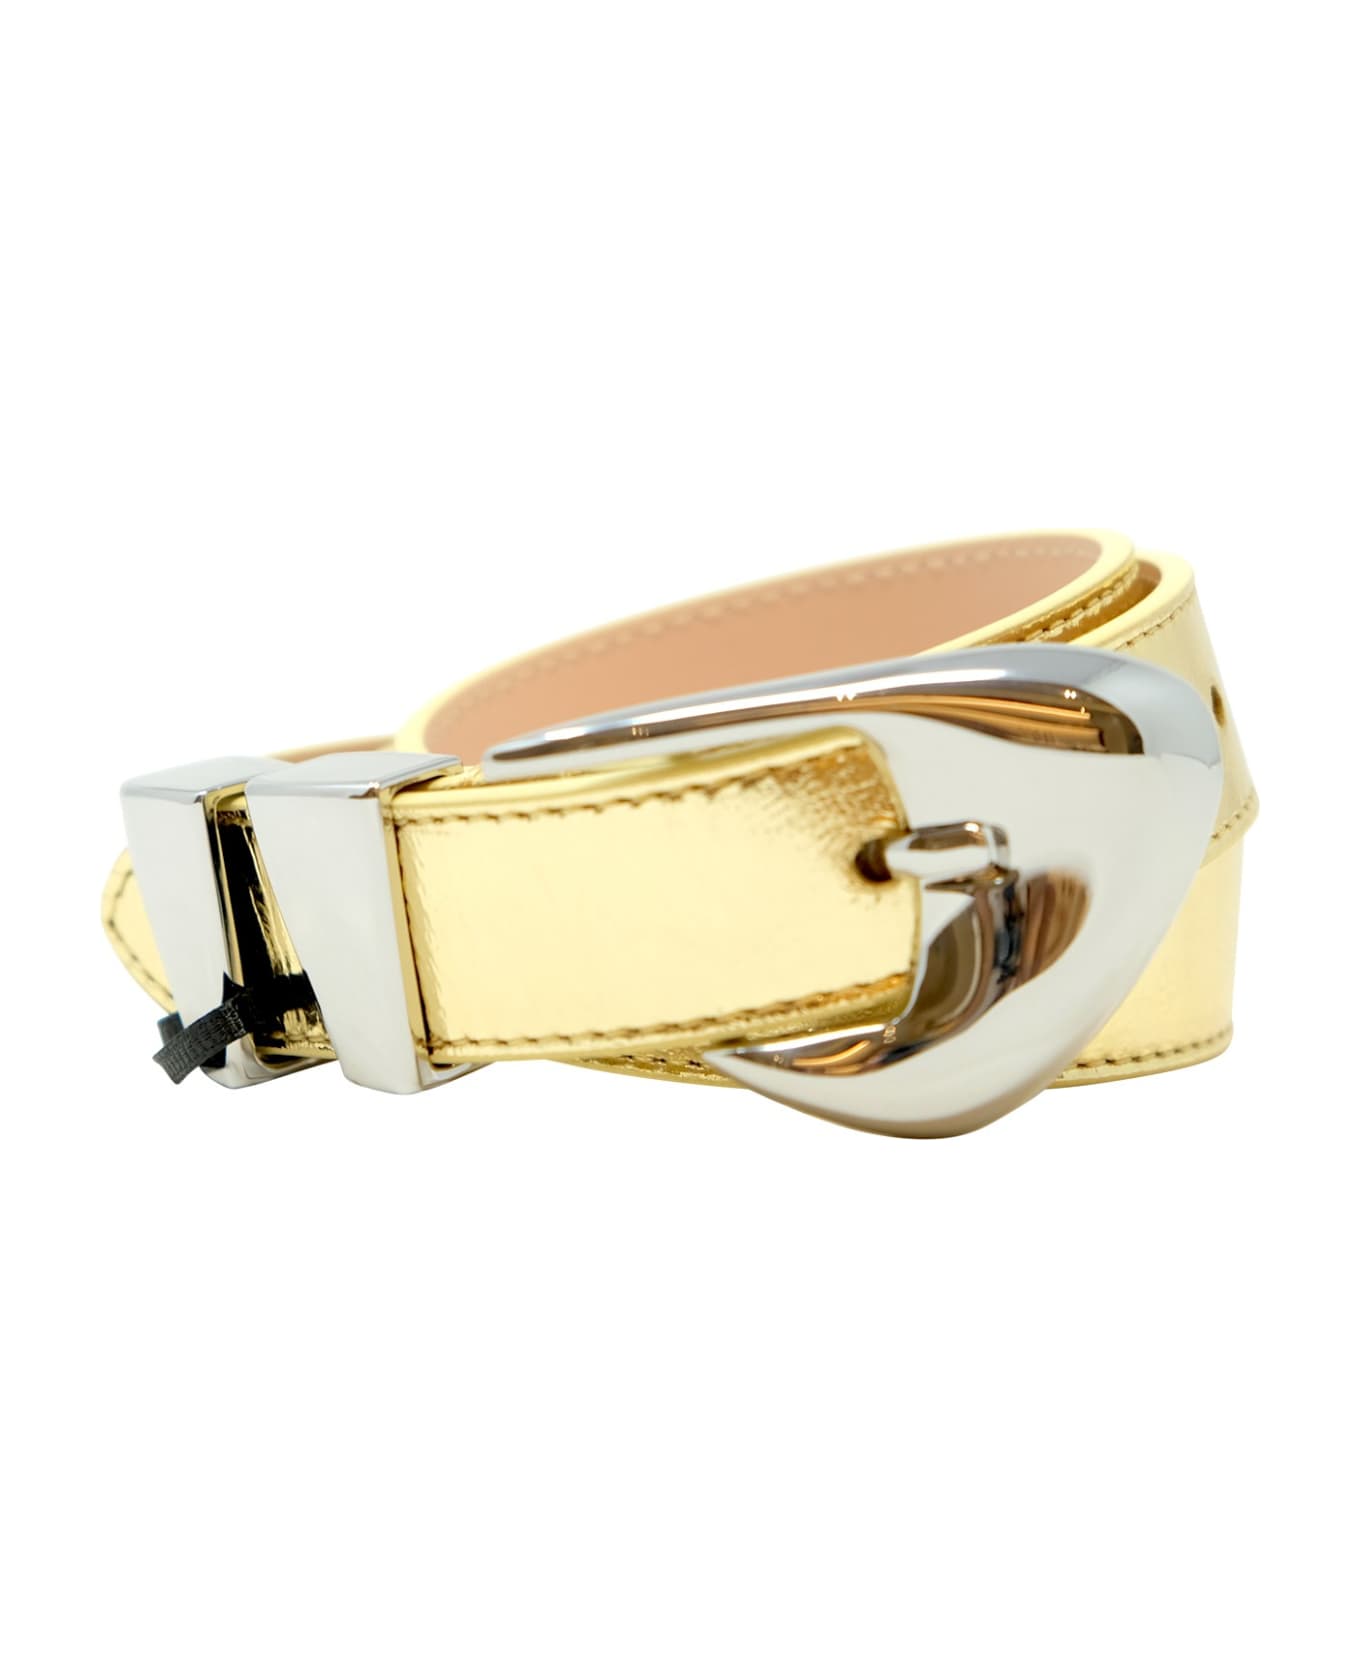 BY FAR Gold Leather Moore Metallic Belt - GOLD